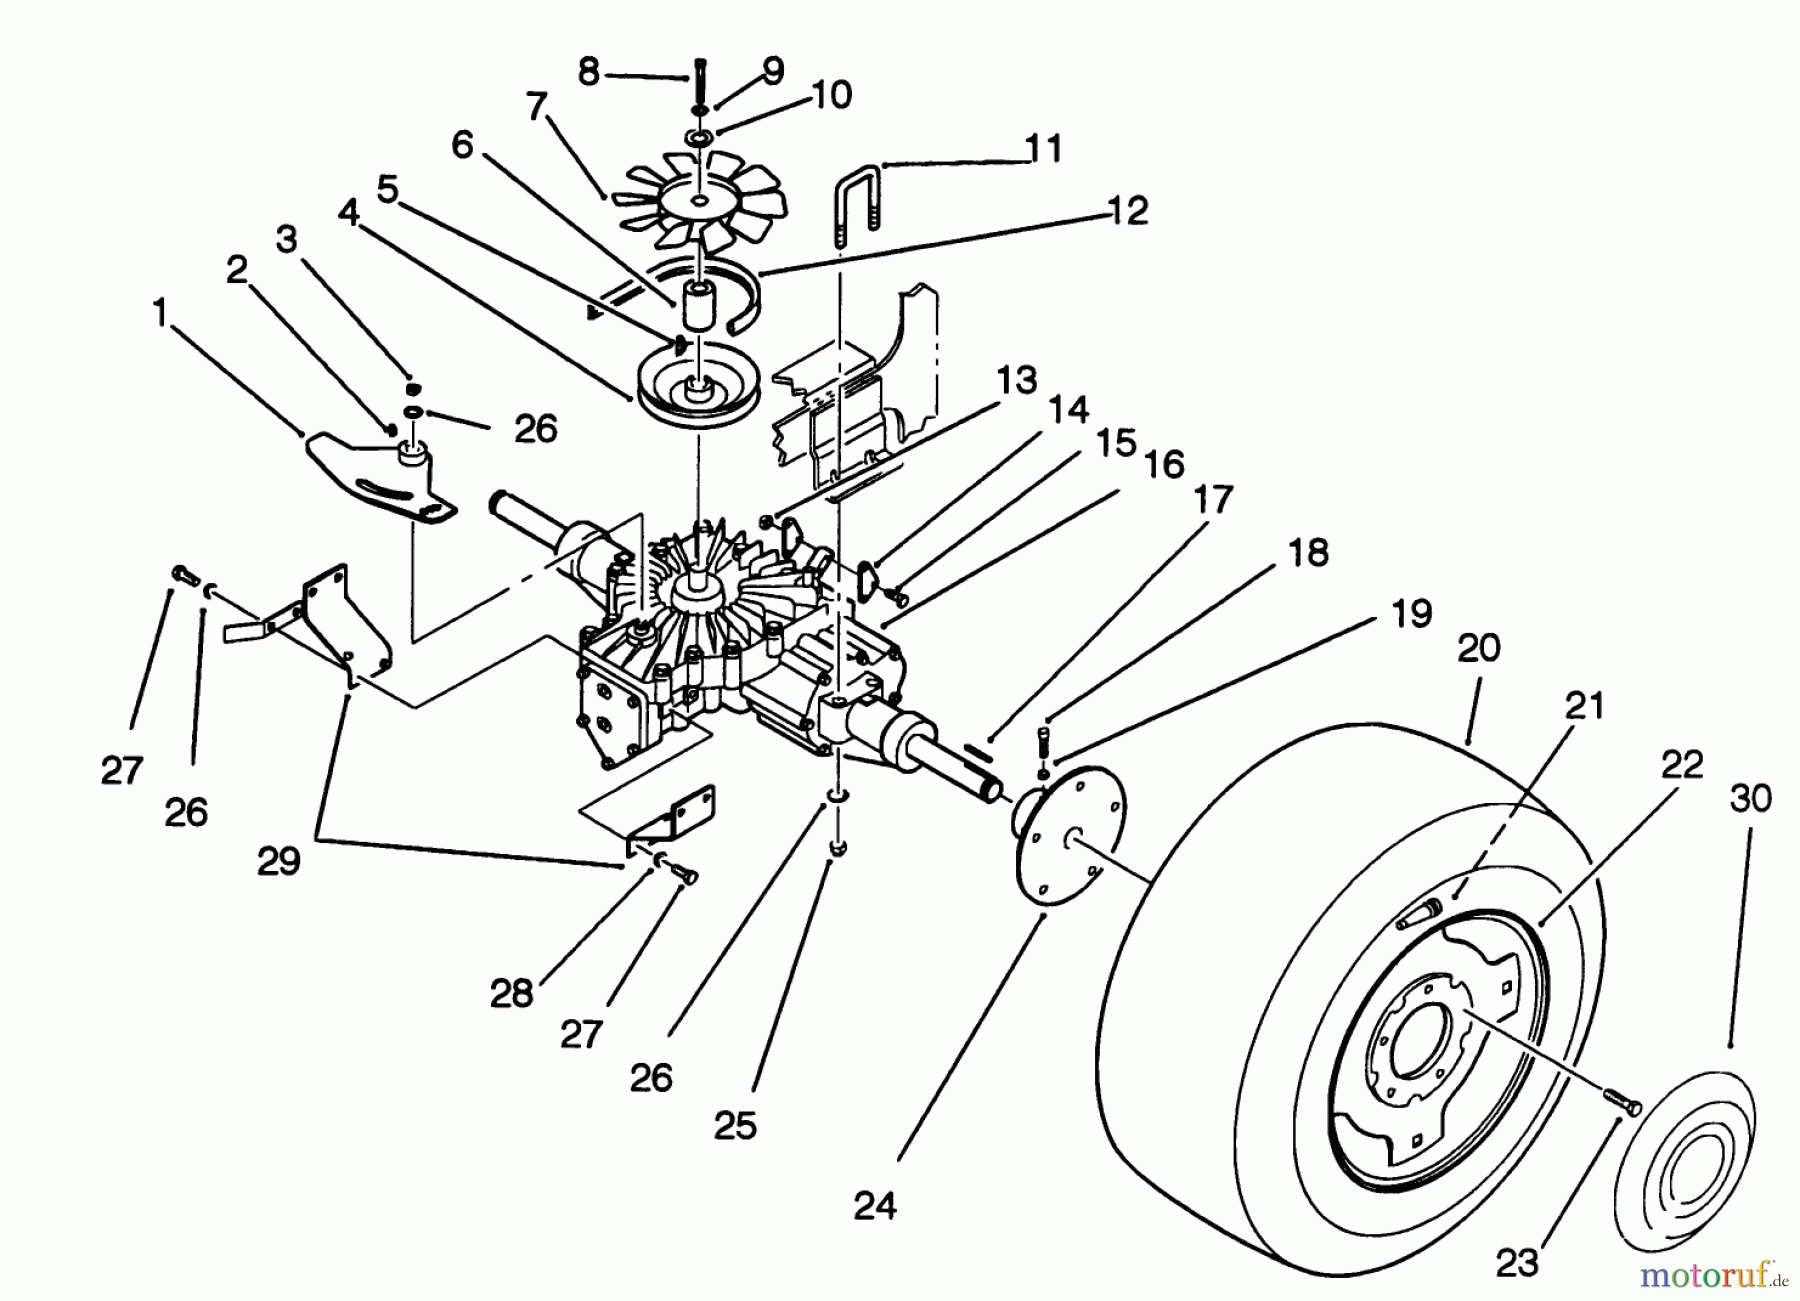  Toro Neu Mowers, Lawn & Garden Tractor Seite 2 R2-16BE01 (246-H) - Toro 246-H Yard Tractor, 1992 (2000001-2999999) REAR WHEEL AND TRANSMISSION ASSEMBLY